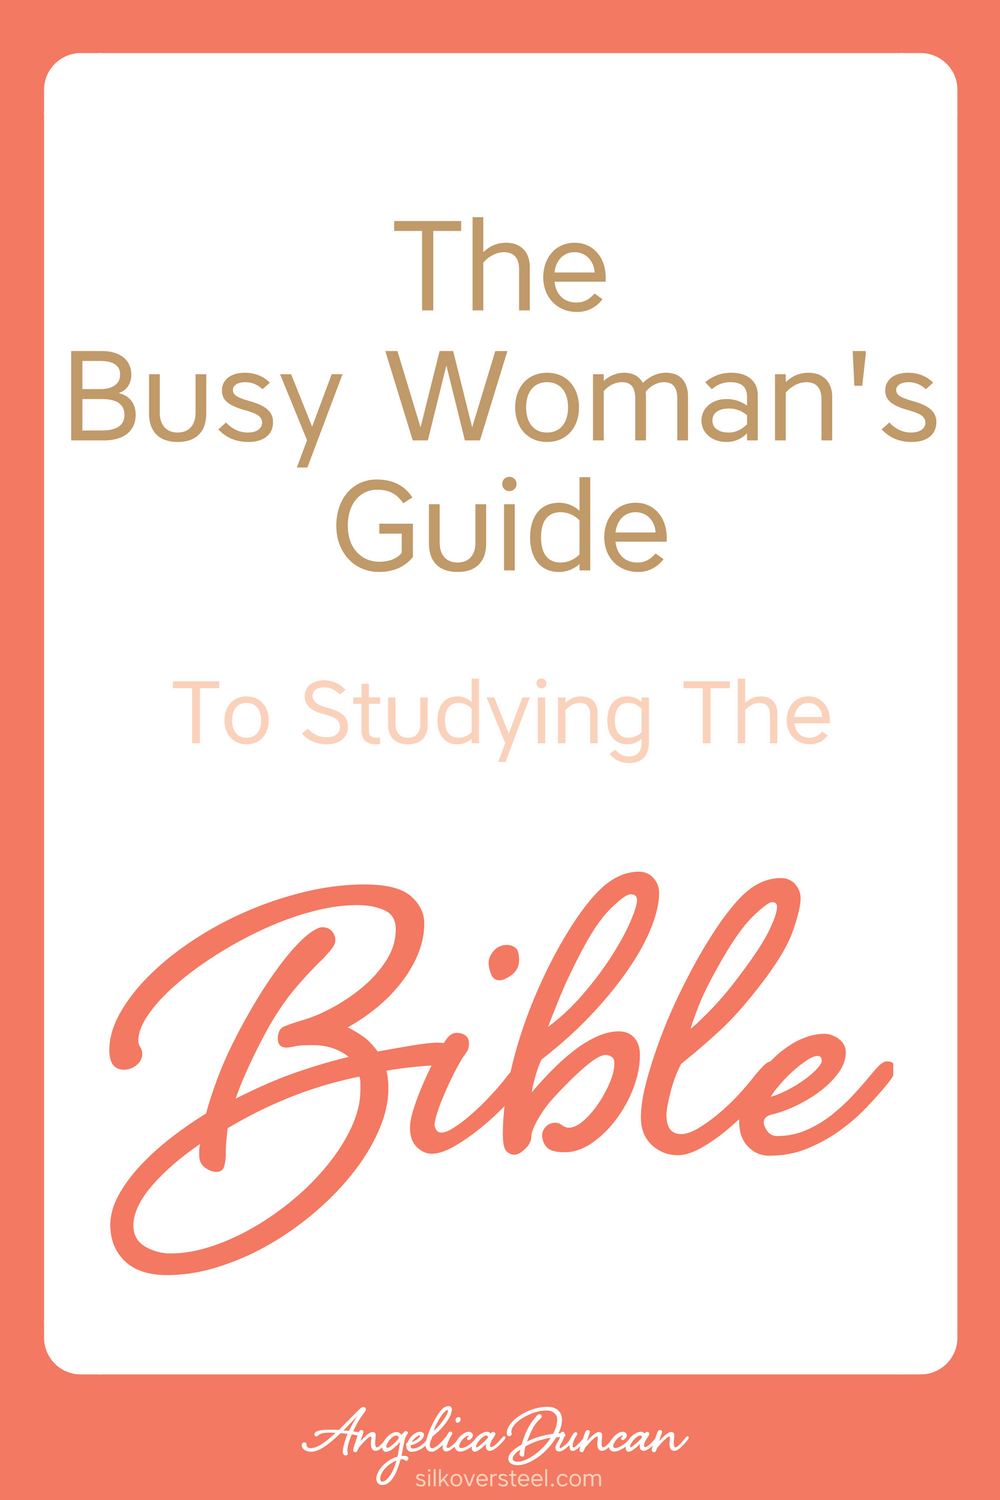 Find yourself in a busy season with wiving, mothering, and all things life? The Busy Woman's Guide To Studying The Bible is just what you need! #biblestudy #christianliving #christianlife #christianwoman #chrisitanblogger #faith #bible #biblicaltruth #devotions #dailydevotions #quiettime #quiettimewithgod #scripture #verseoftheday #godsword #angelicaduncan #silkoversteel #sos